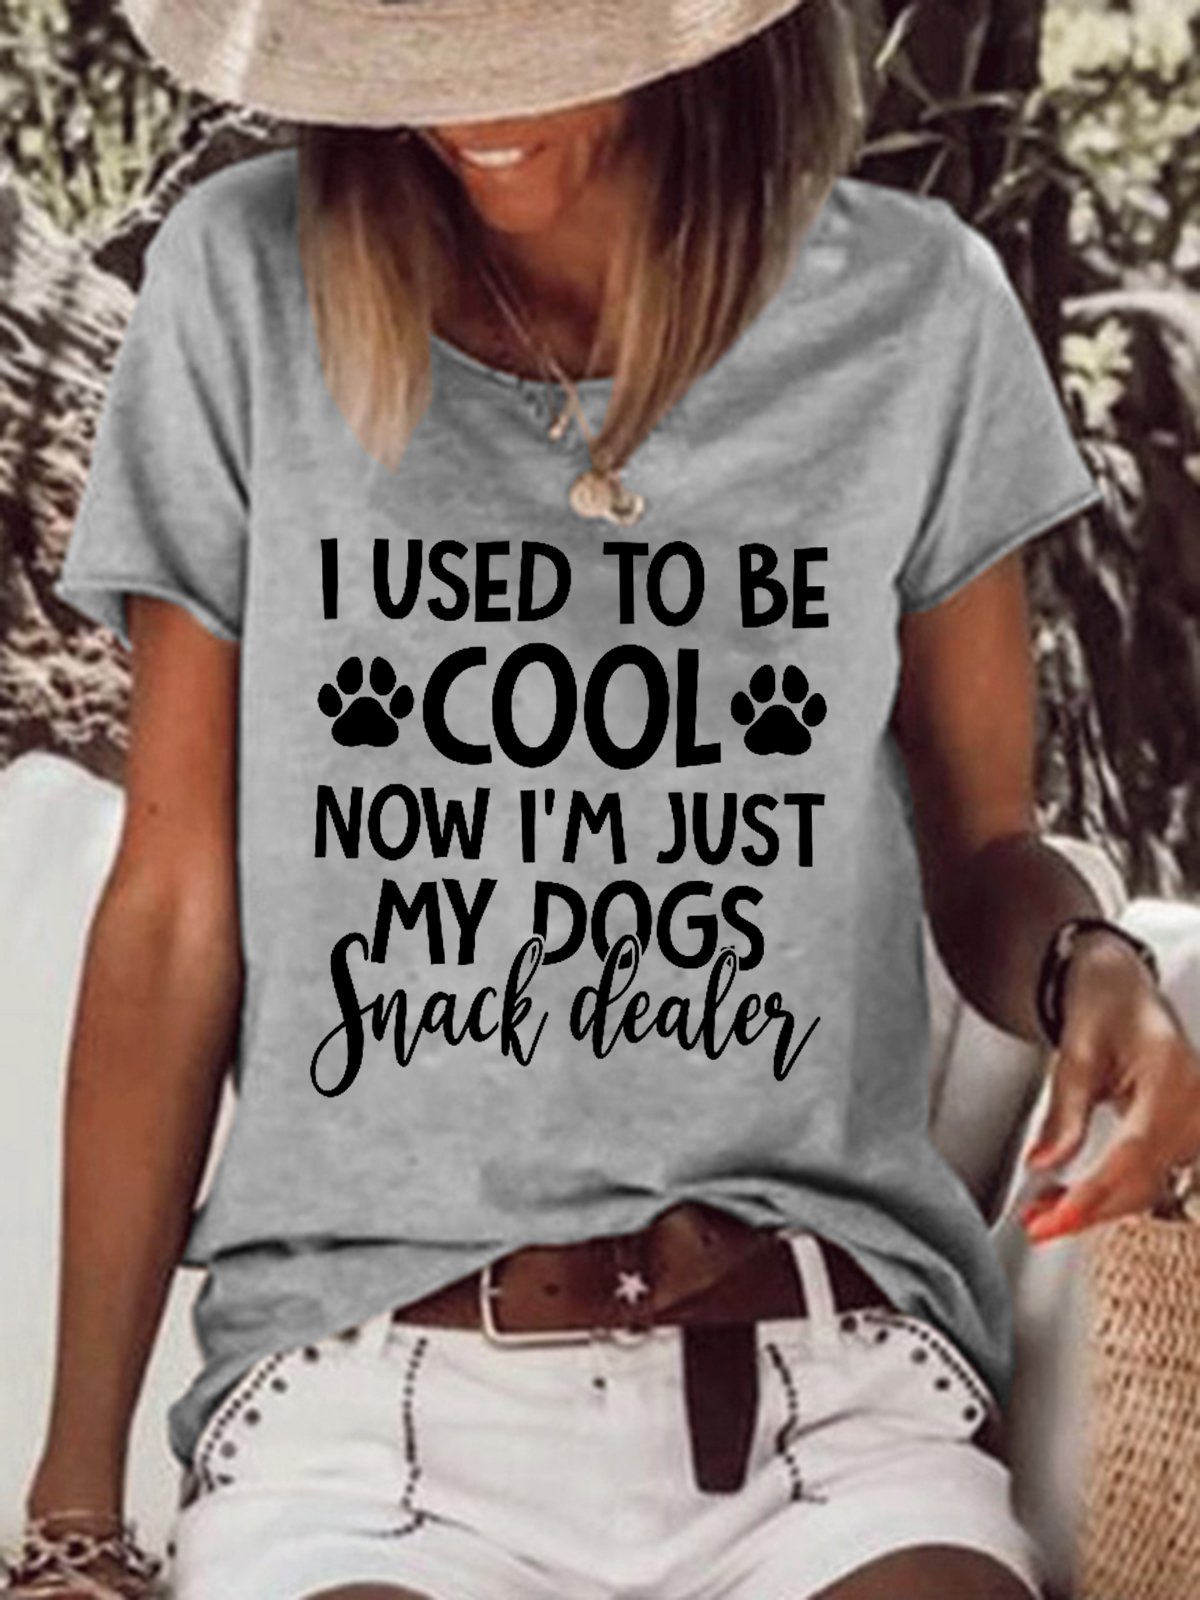 I Used To Be Cool Now I'm Just My Dogs Snack Dealer Women‘s Short Sleeve Top